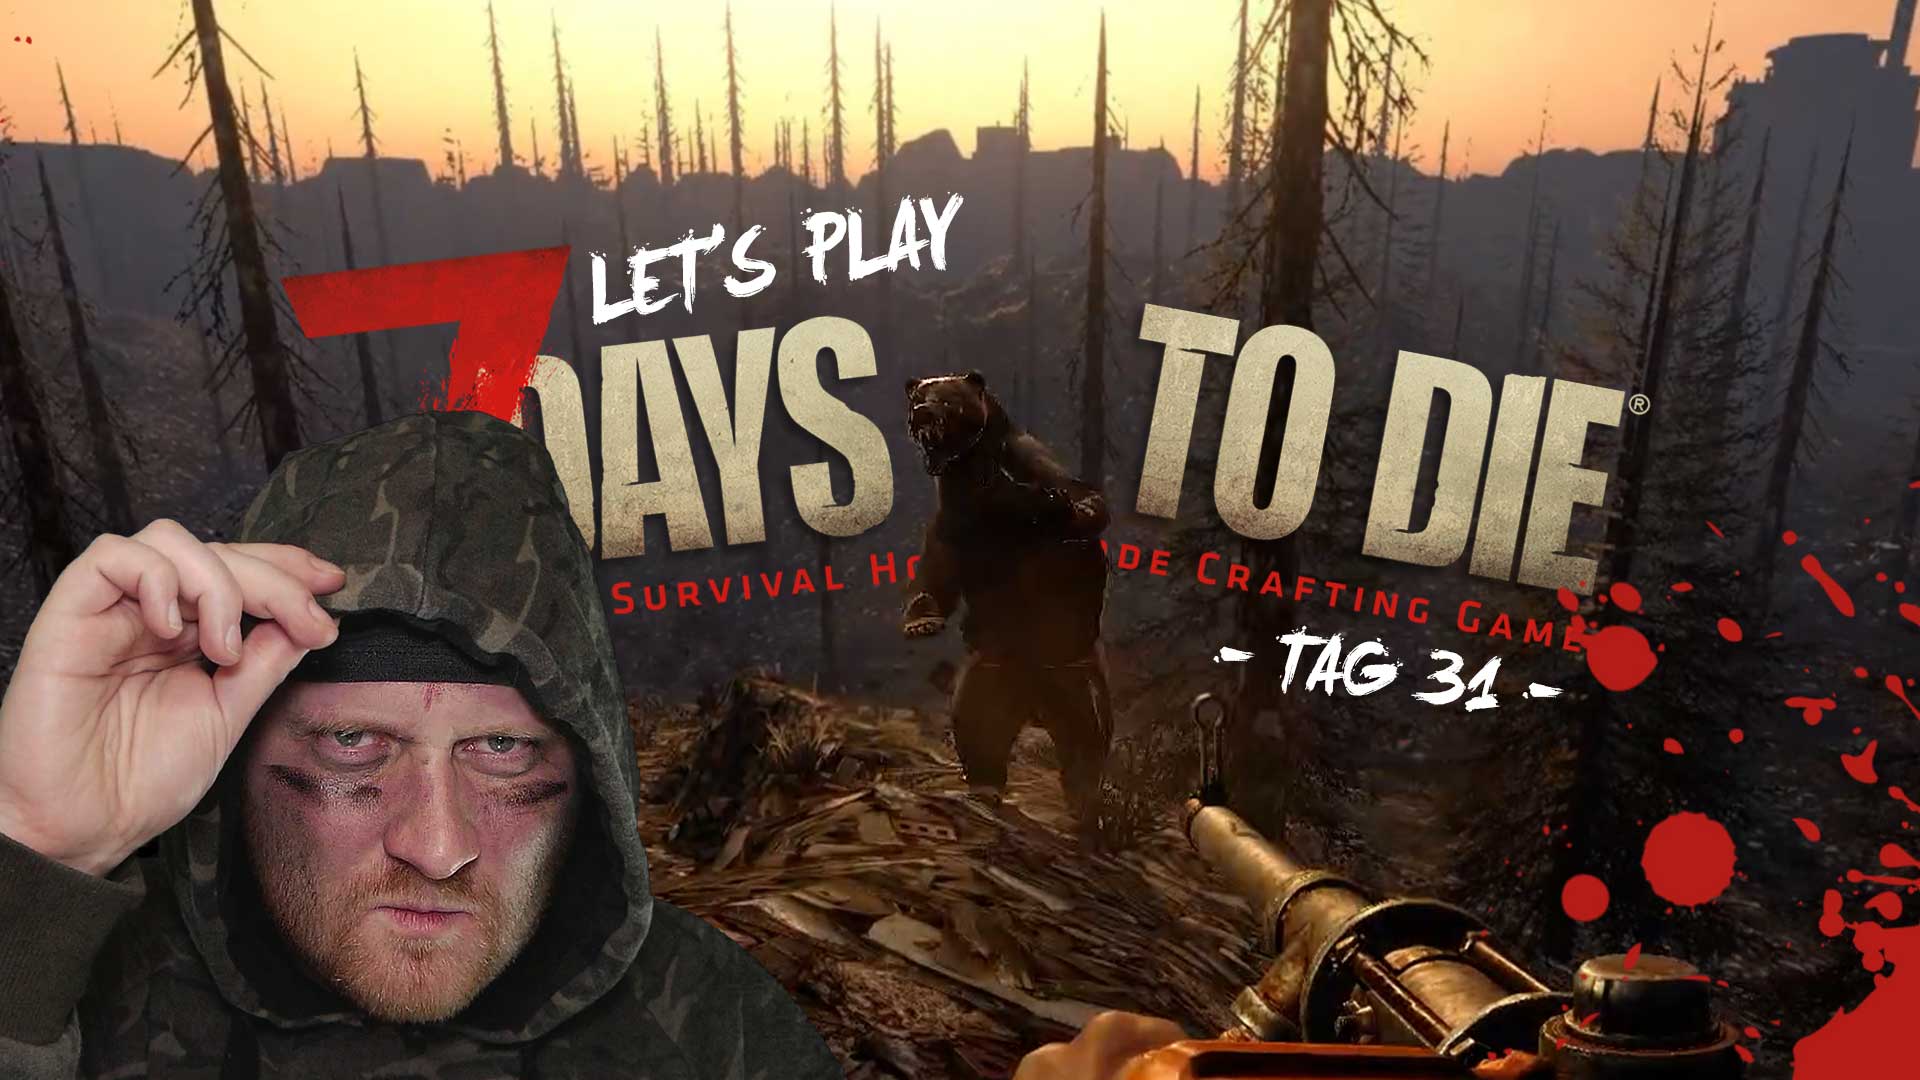 lets play 7 days to die tag 31 GG